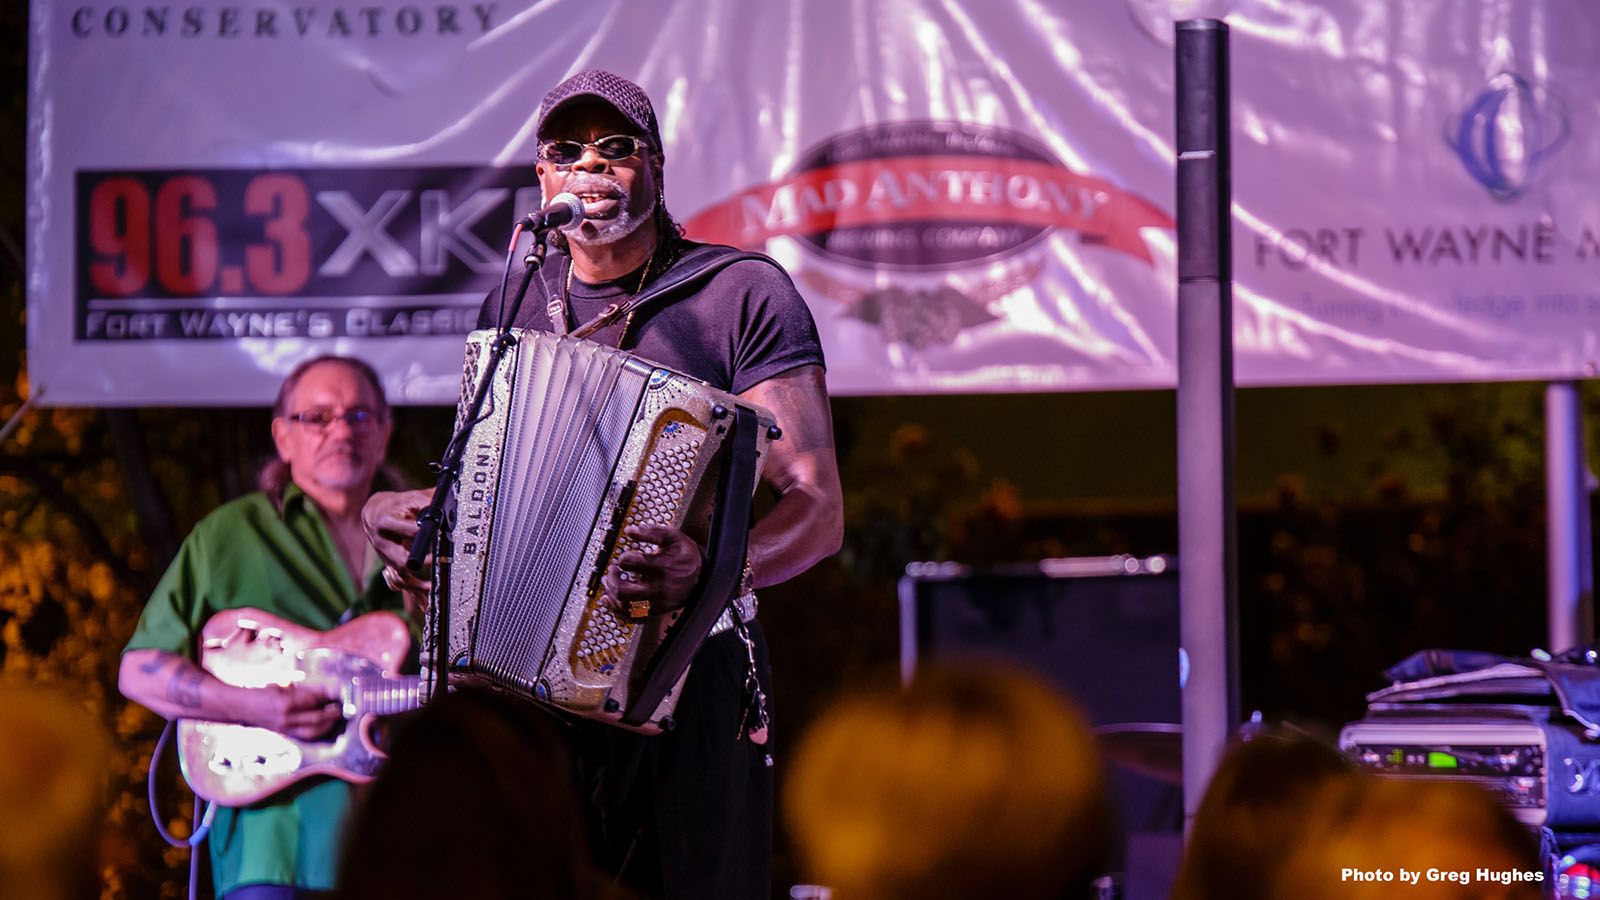 Zydeco performer CJ Chenier & The Red Hot Louisana Band, shown in 2017, returns to Foellinger-Freimann Botanical Conservatory on Friday, Aug. 4, to perform at the two-day Botanical Roots Music Fest.